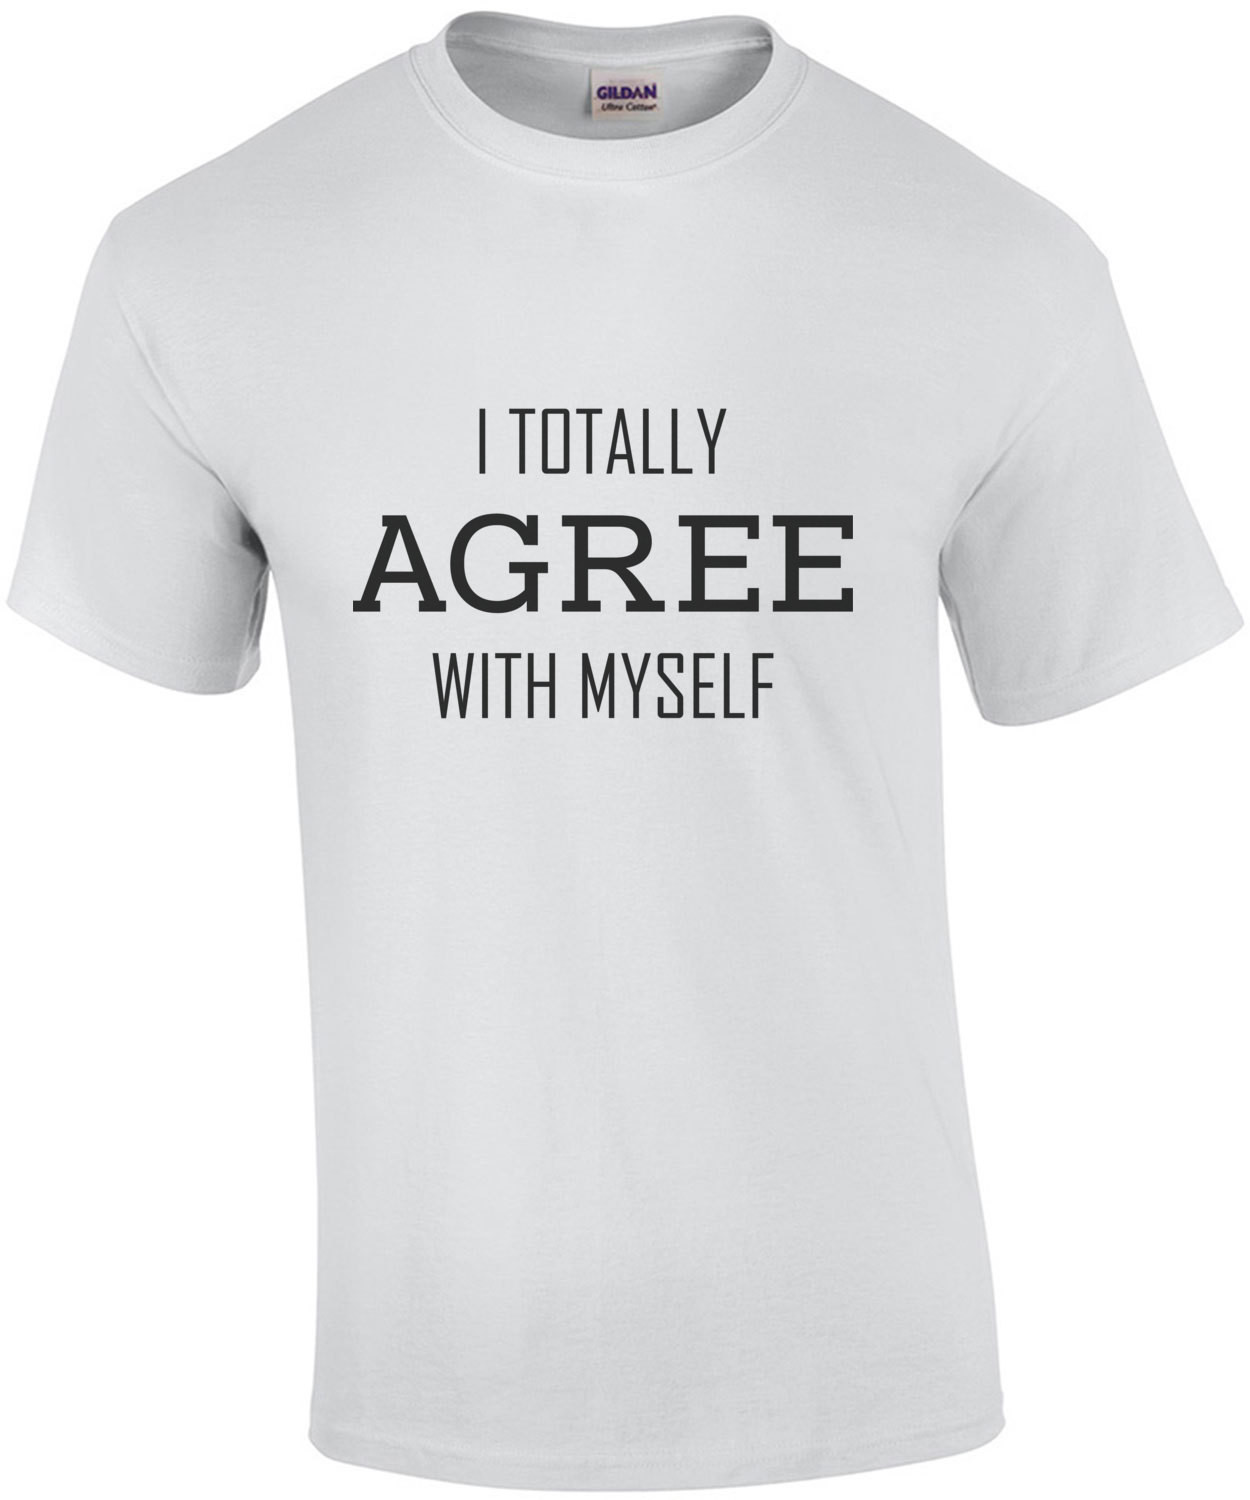 I totally agree with myself - funny t-shirt